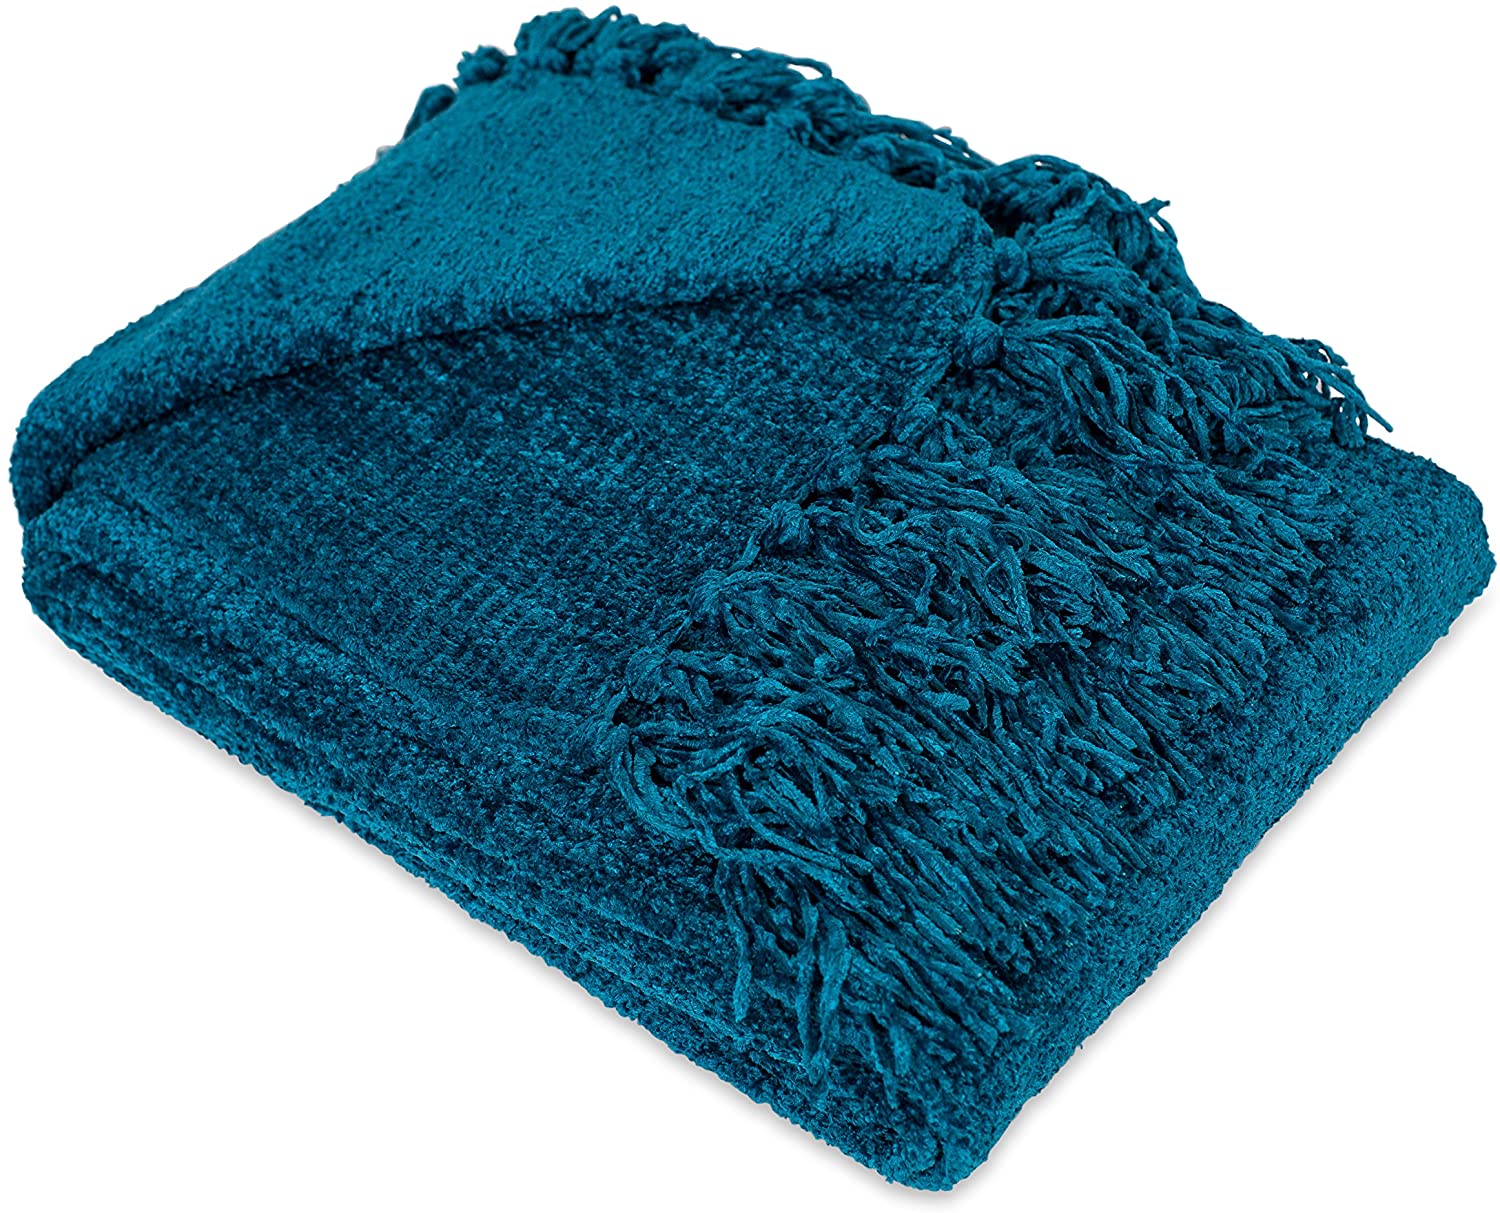 Chenille Throw Blanket, The 50 Best and Enticing Gifts for Grandparents in 2022